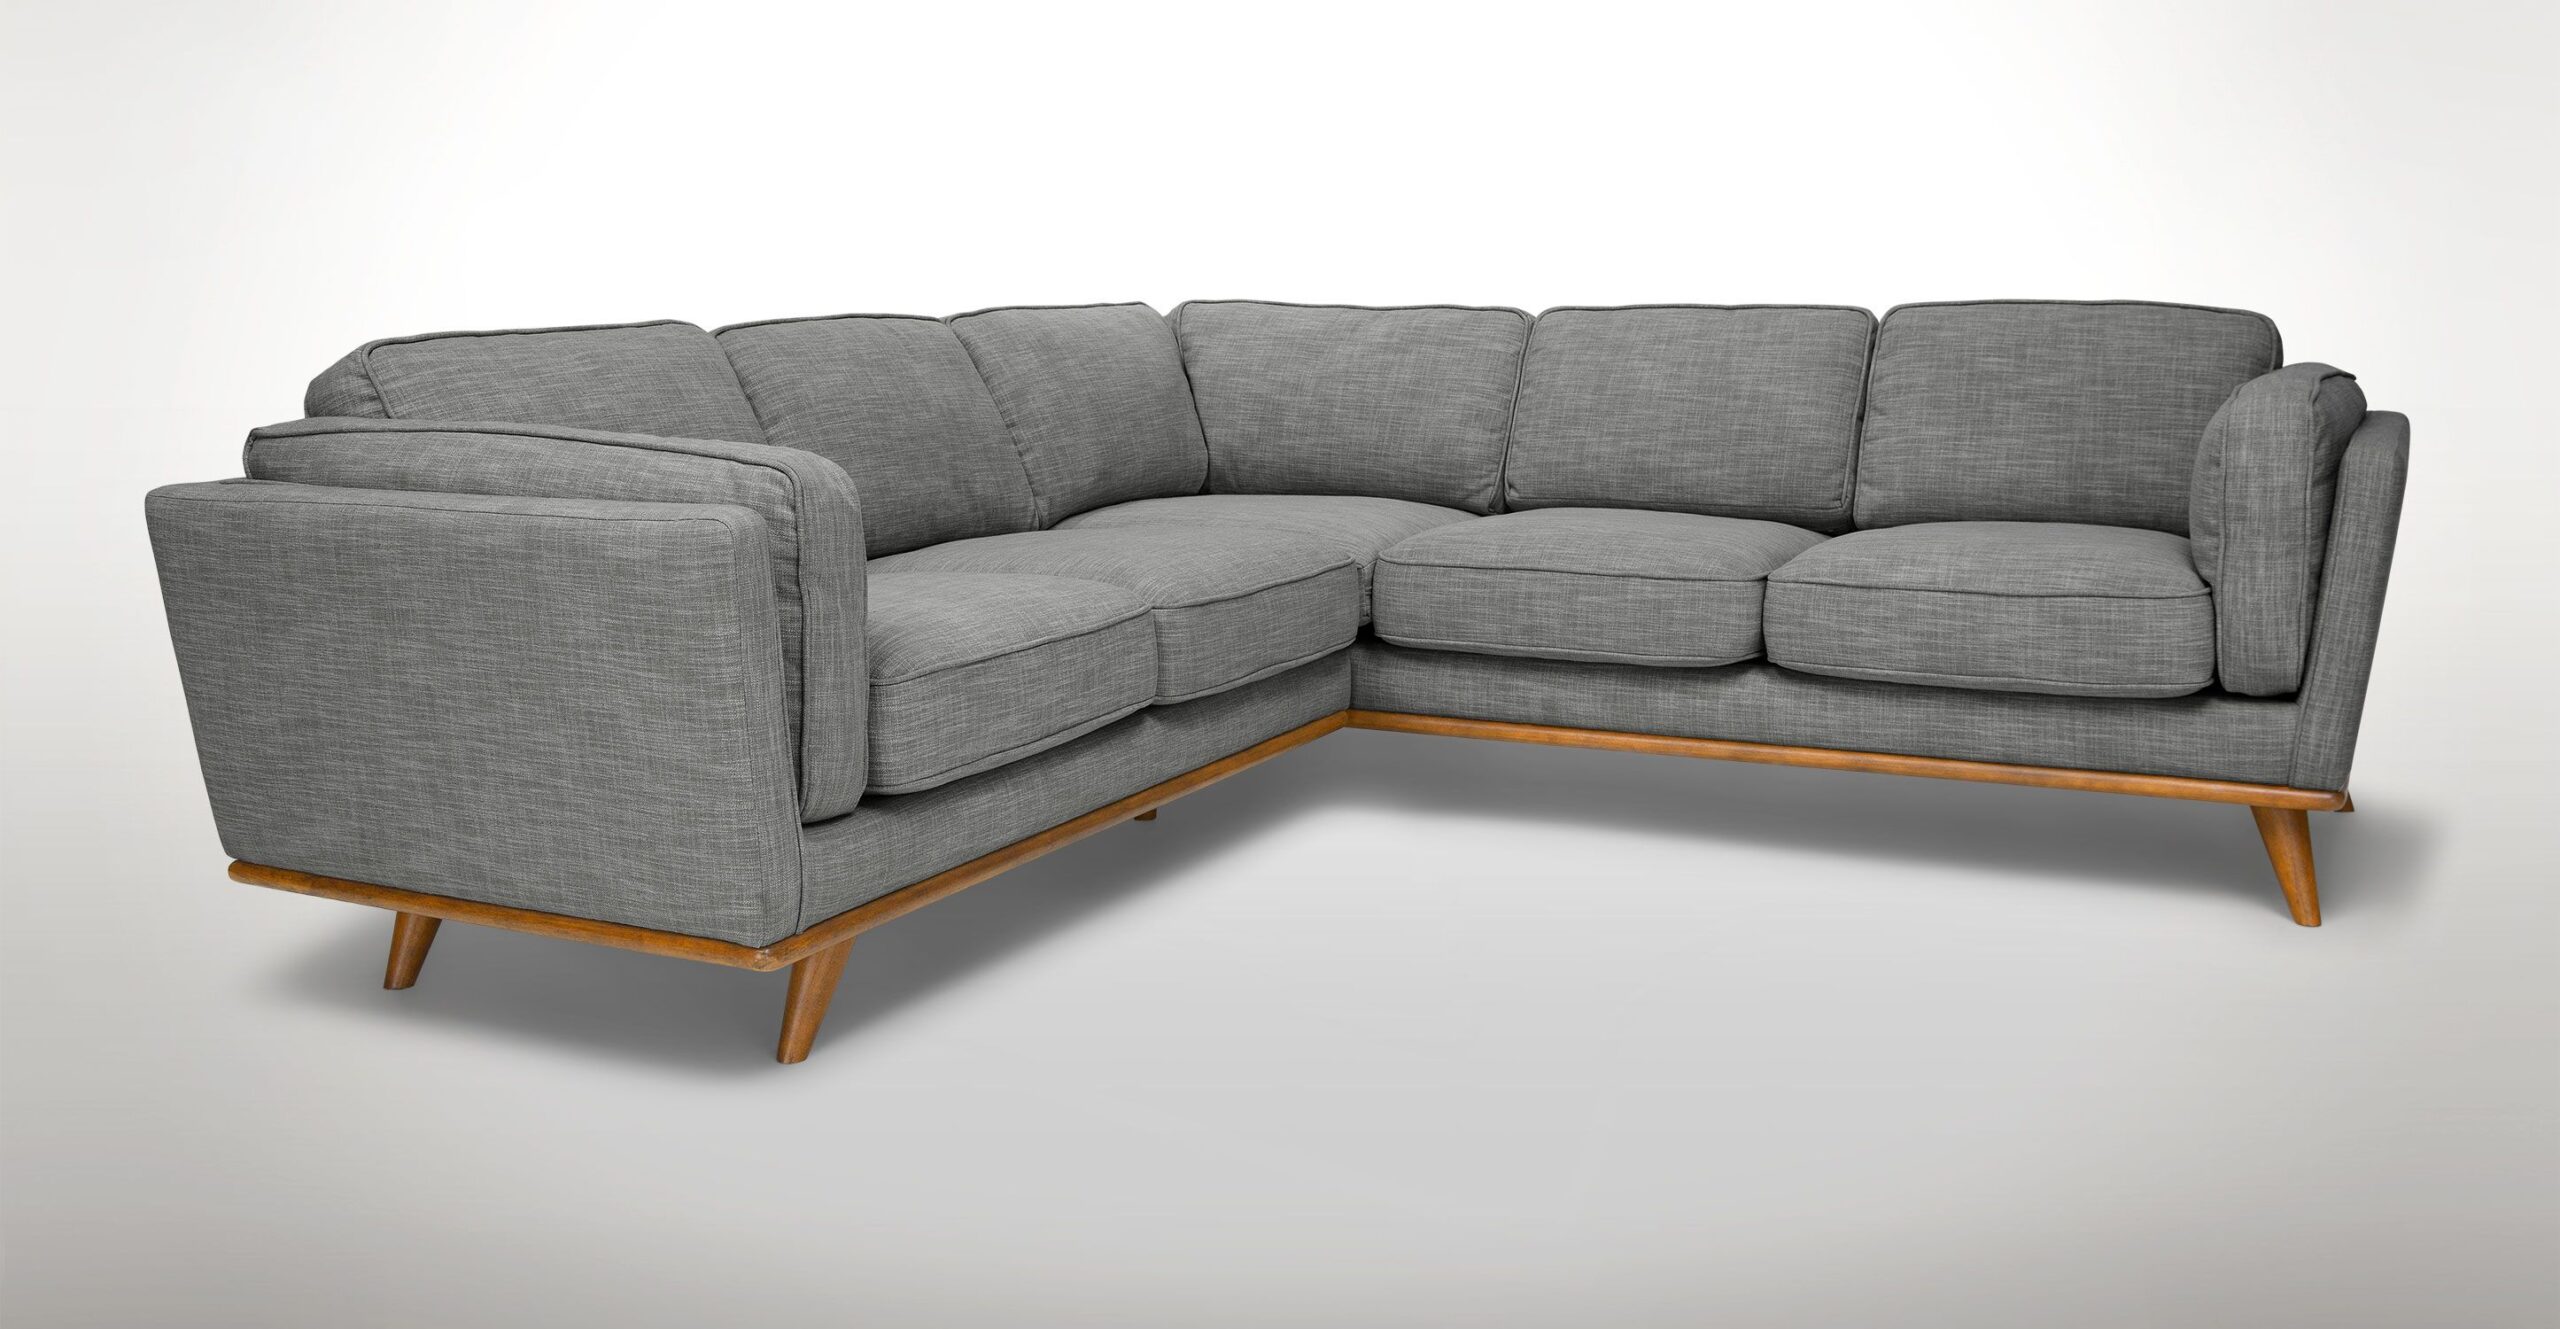 Choosing the Perfect Lubbock Sectional
Sofa for Your Living Room